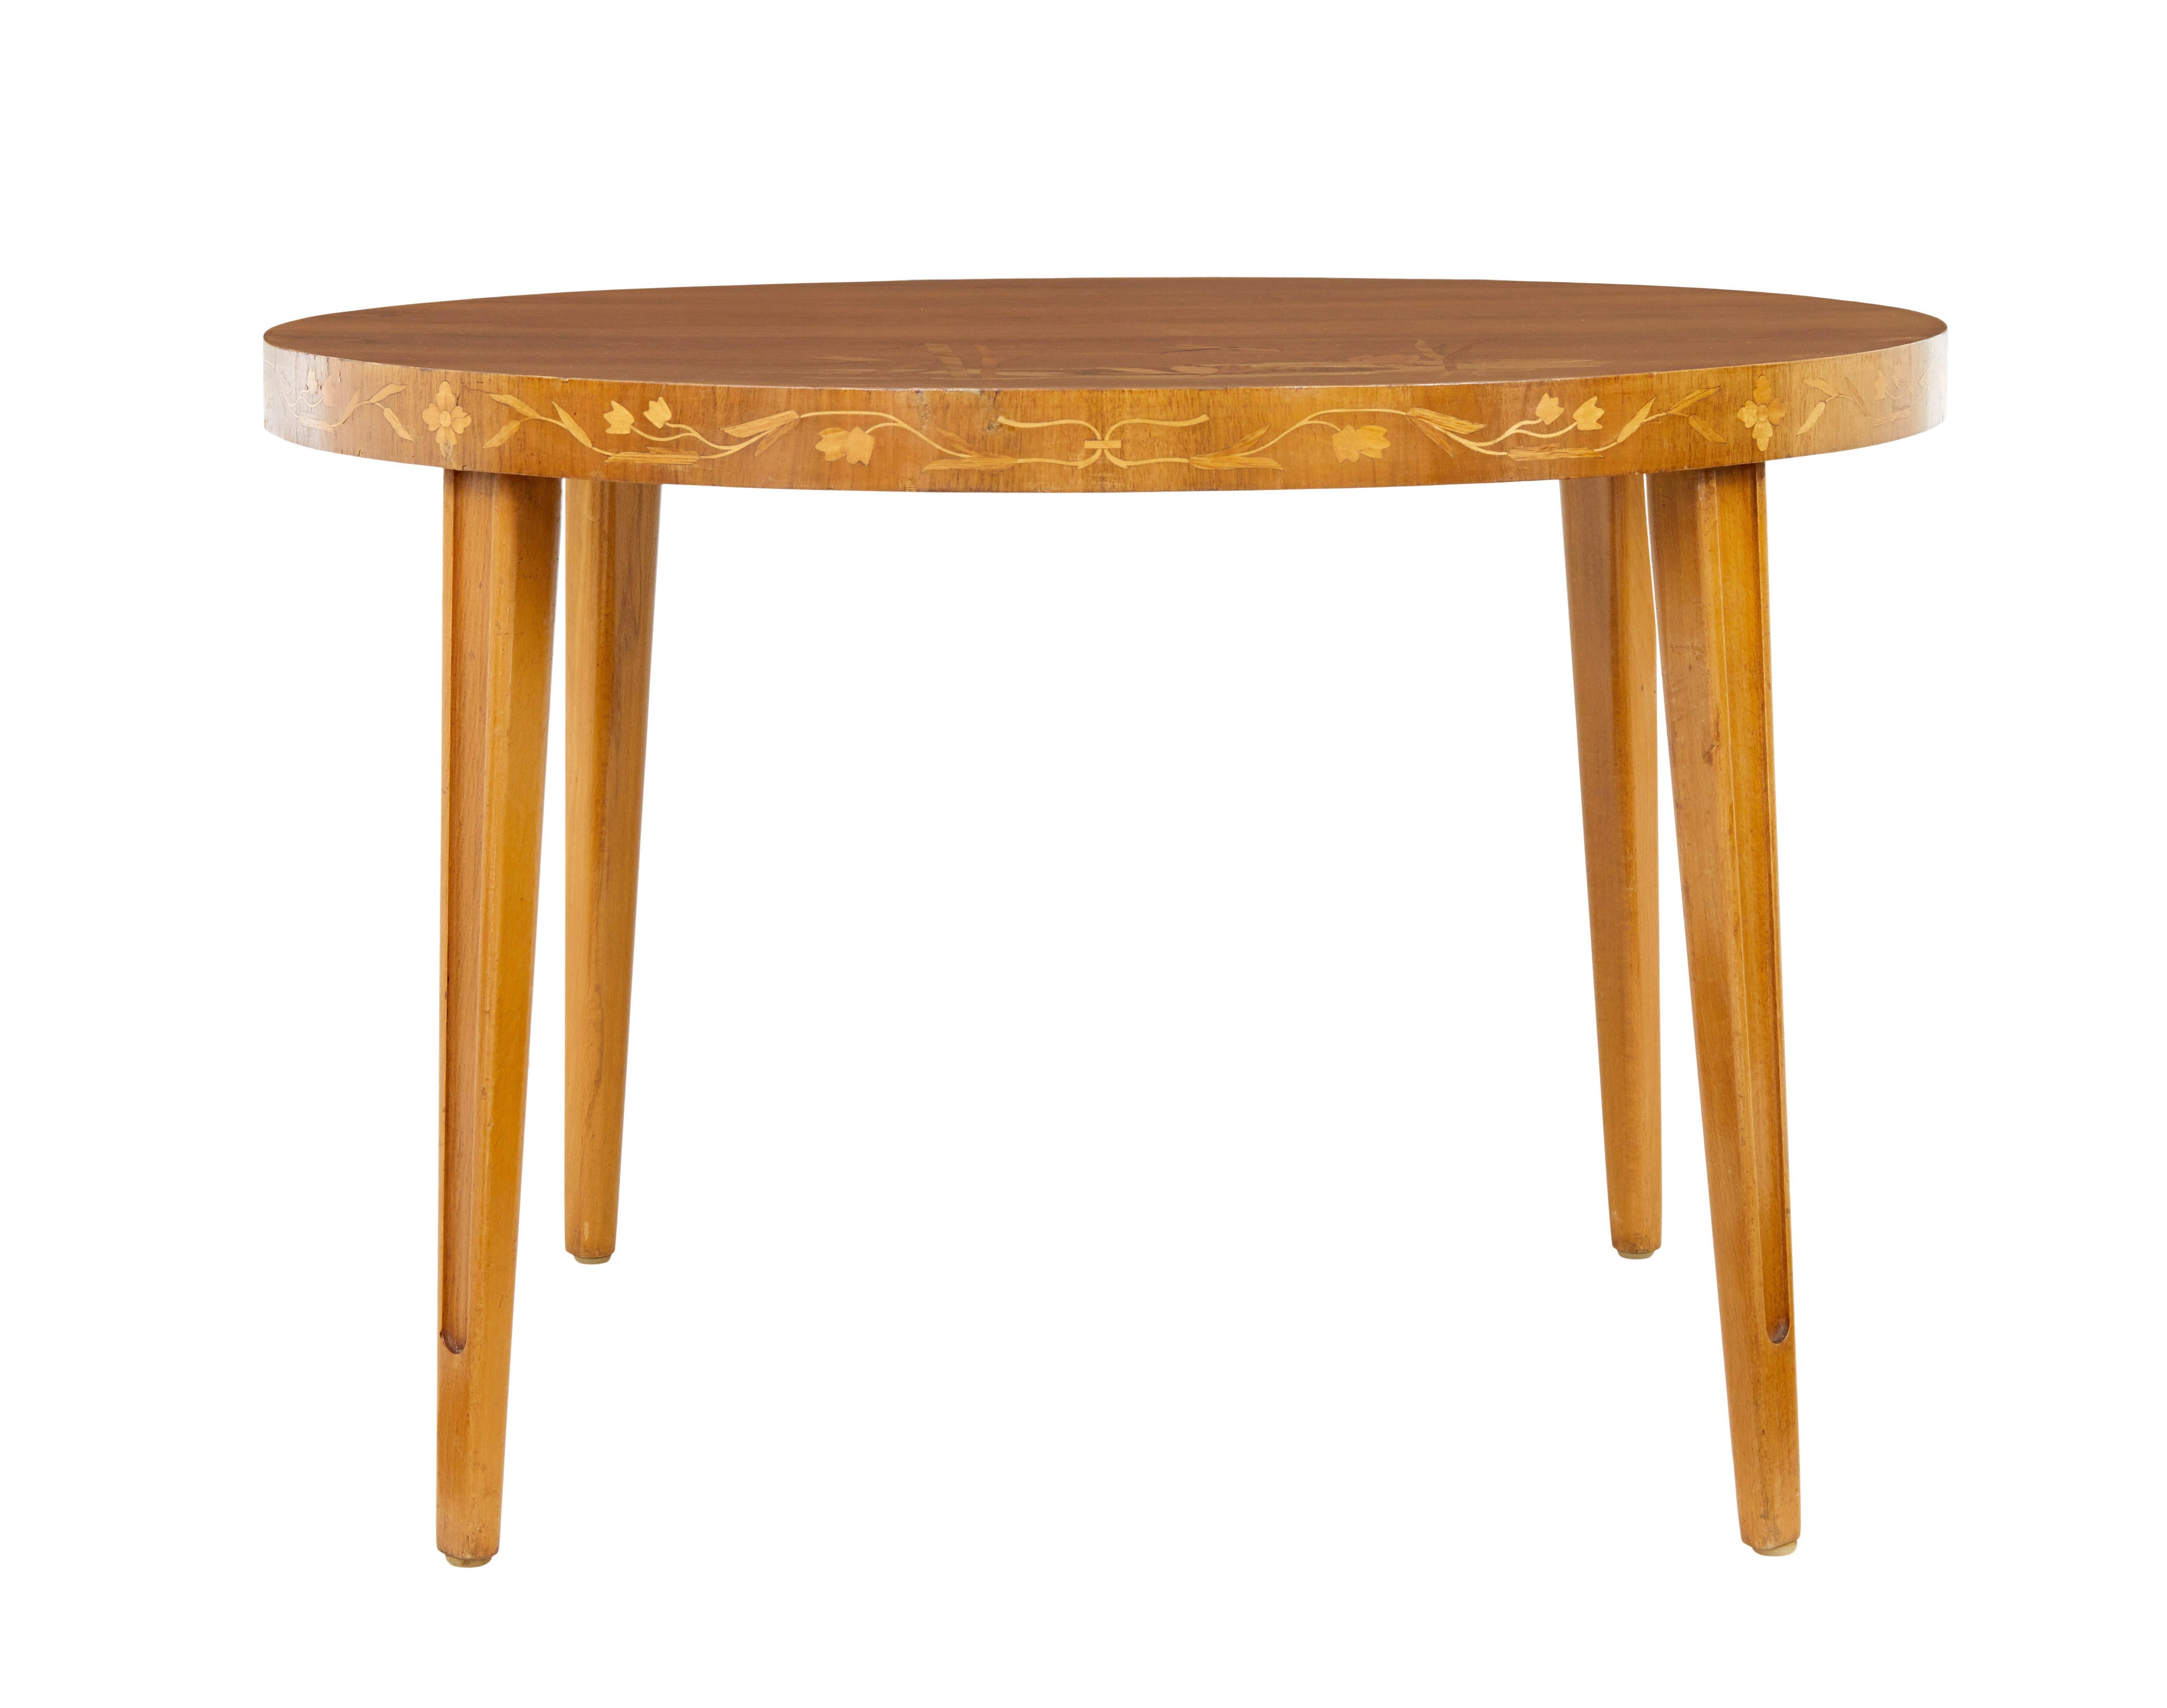 Mid century Scandinavian inlaid elm coffee table circa 1950.

Good quality circular coffee table made in Sweden.  Fine mid century design but with a strong influence from the art deco period.  Beautifully inlaid with burr's and figured timbers to